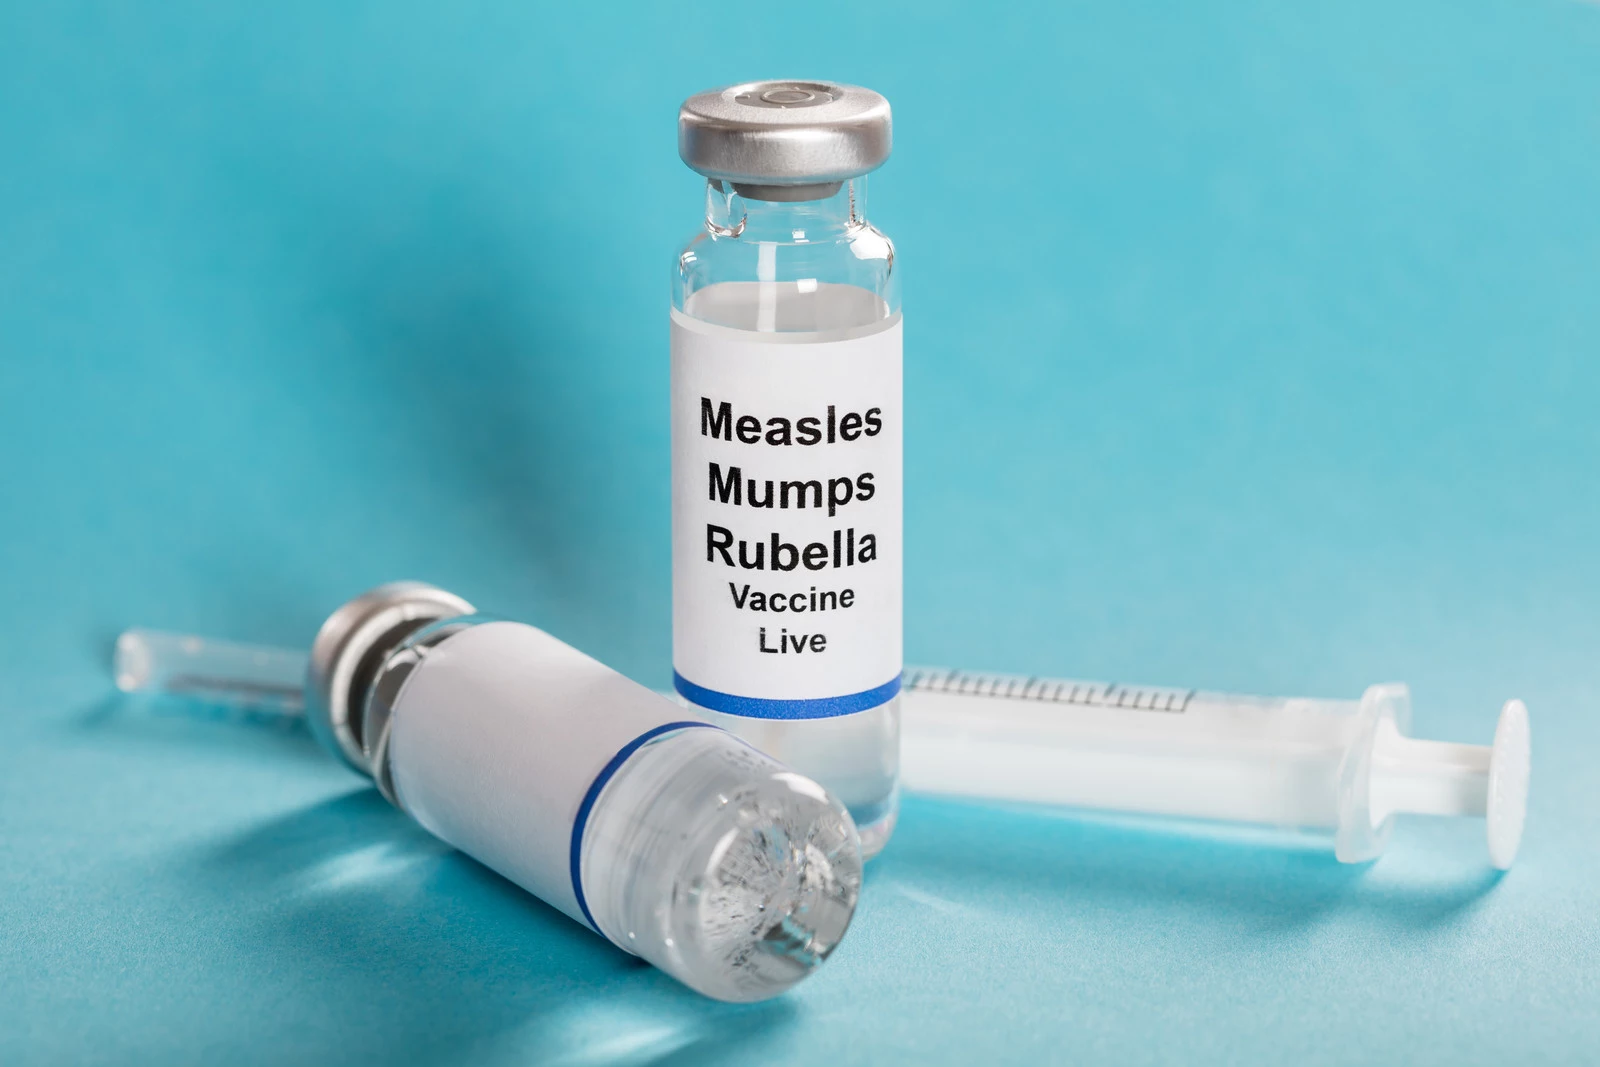 Measles Mumps Rubella Vaccine Vials With Syringe Over Turquoise Background